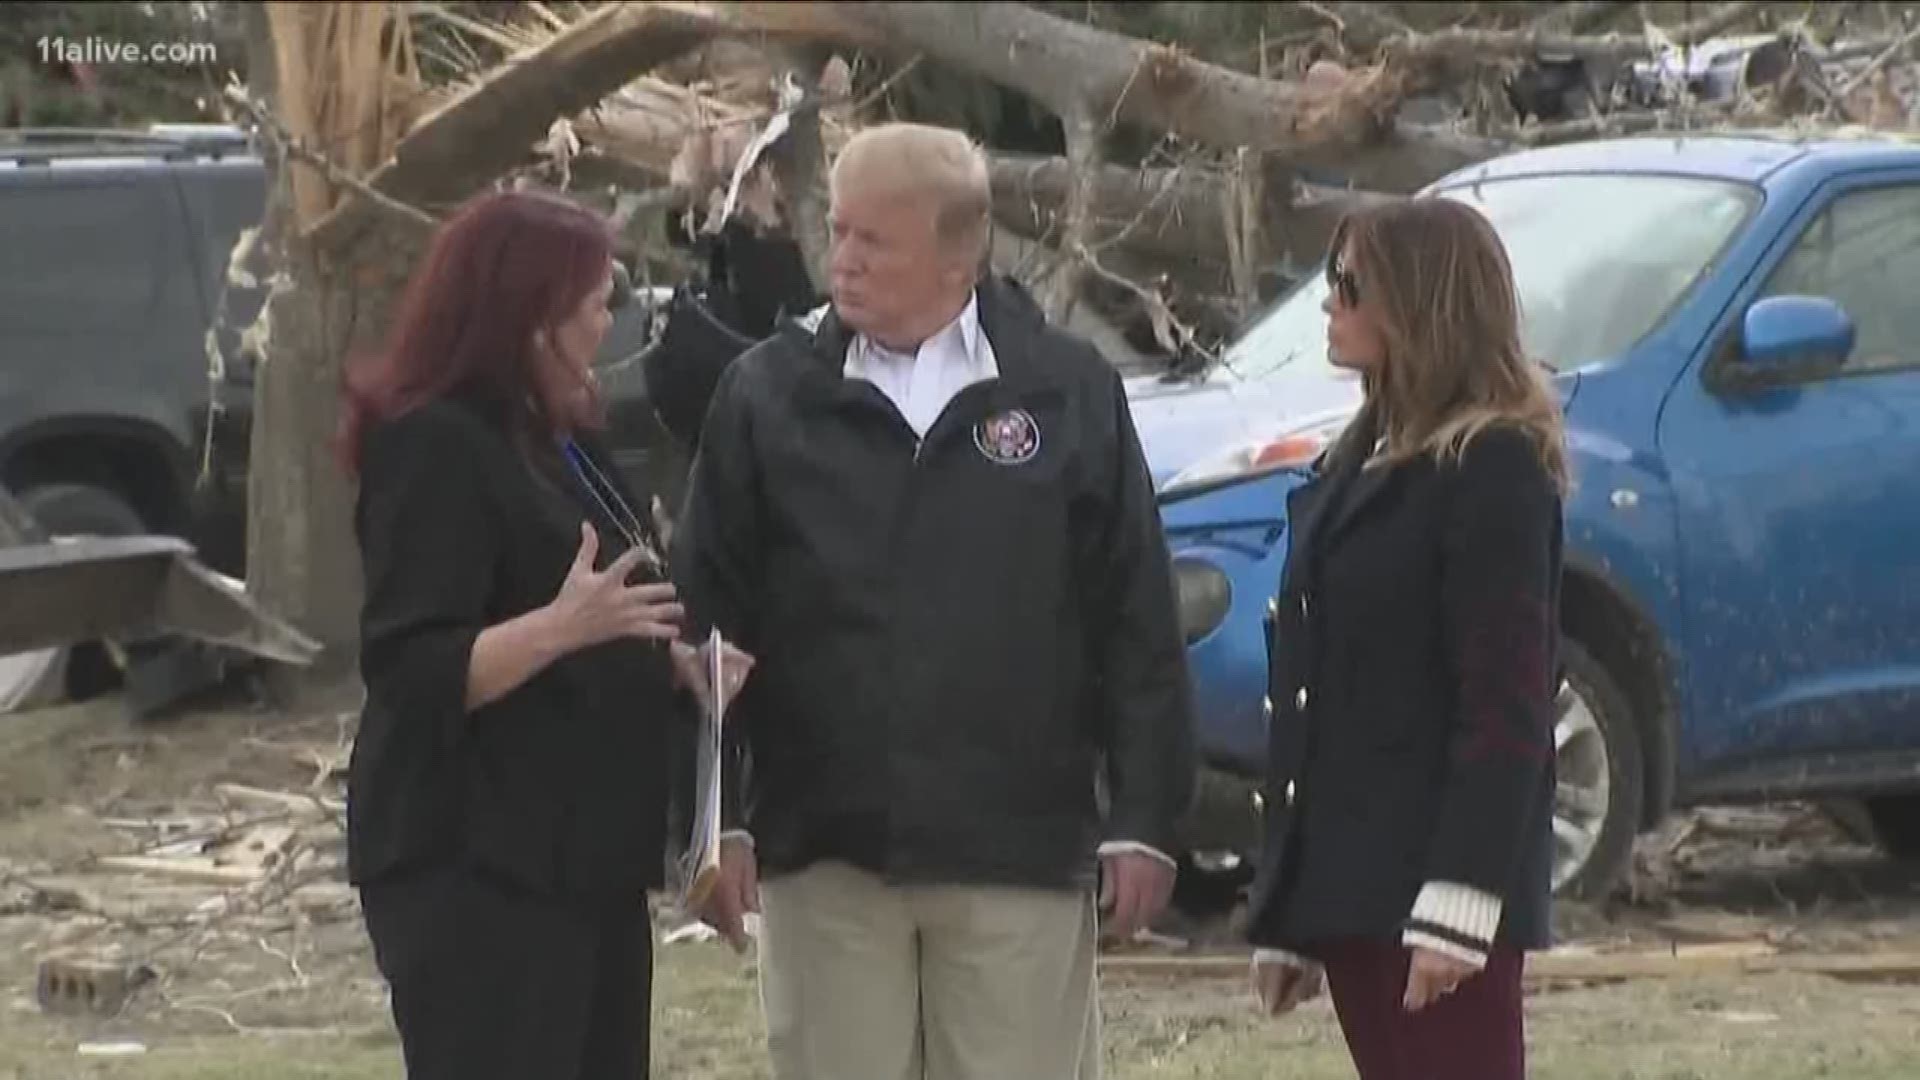 The President and First Lady were in Alabama.